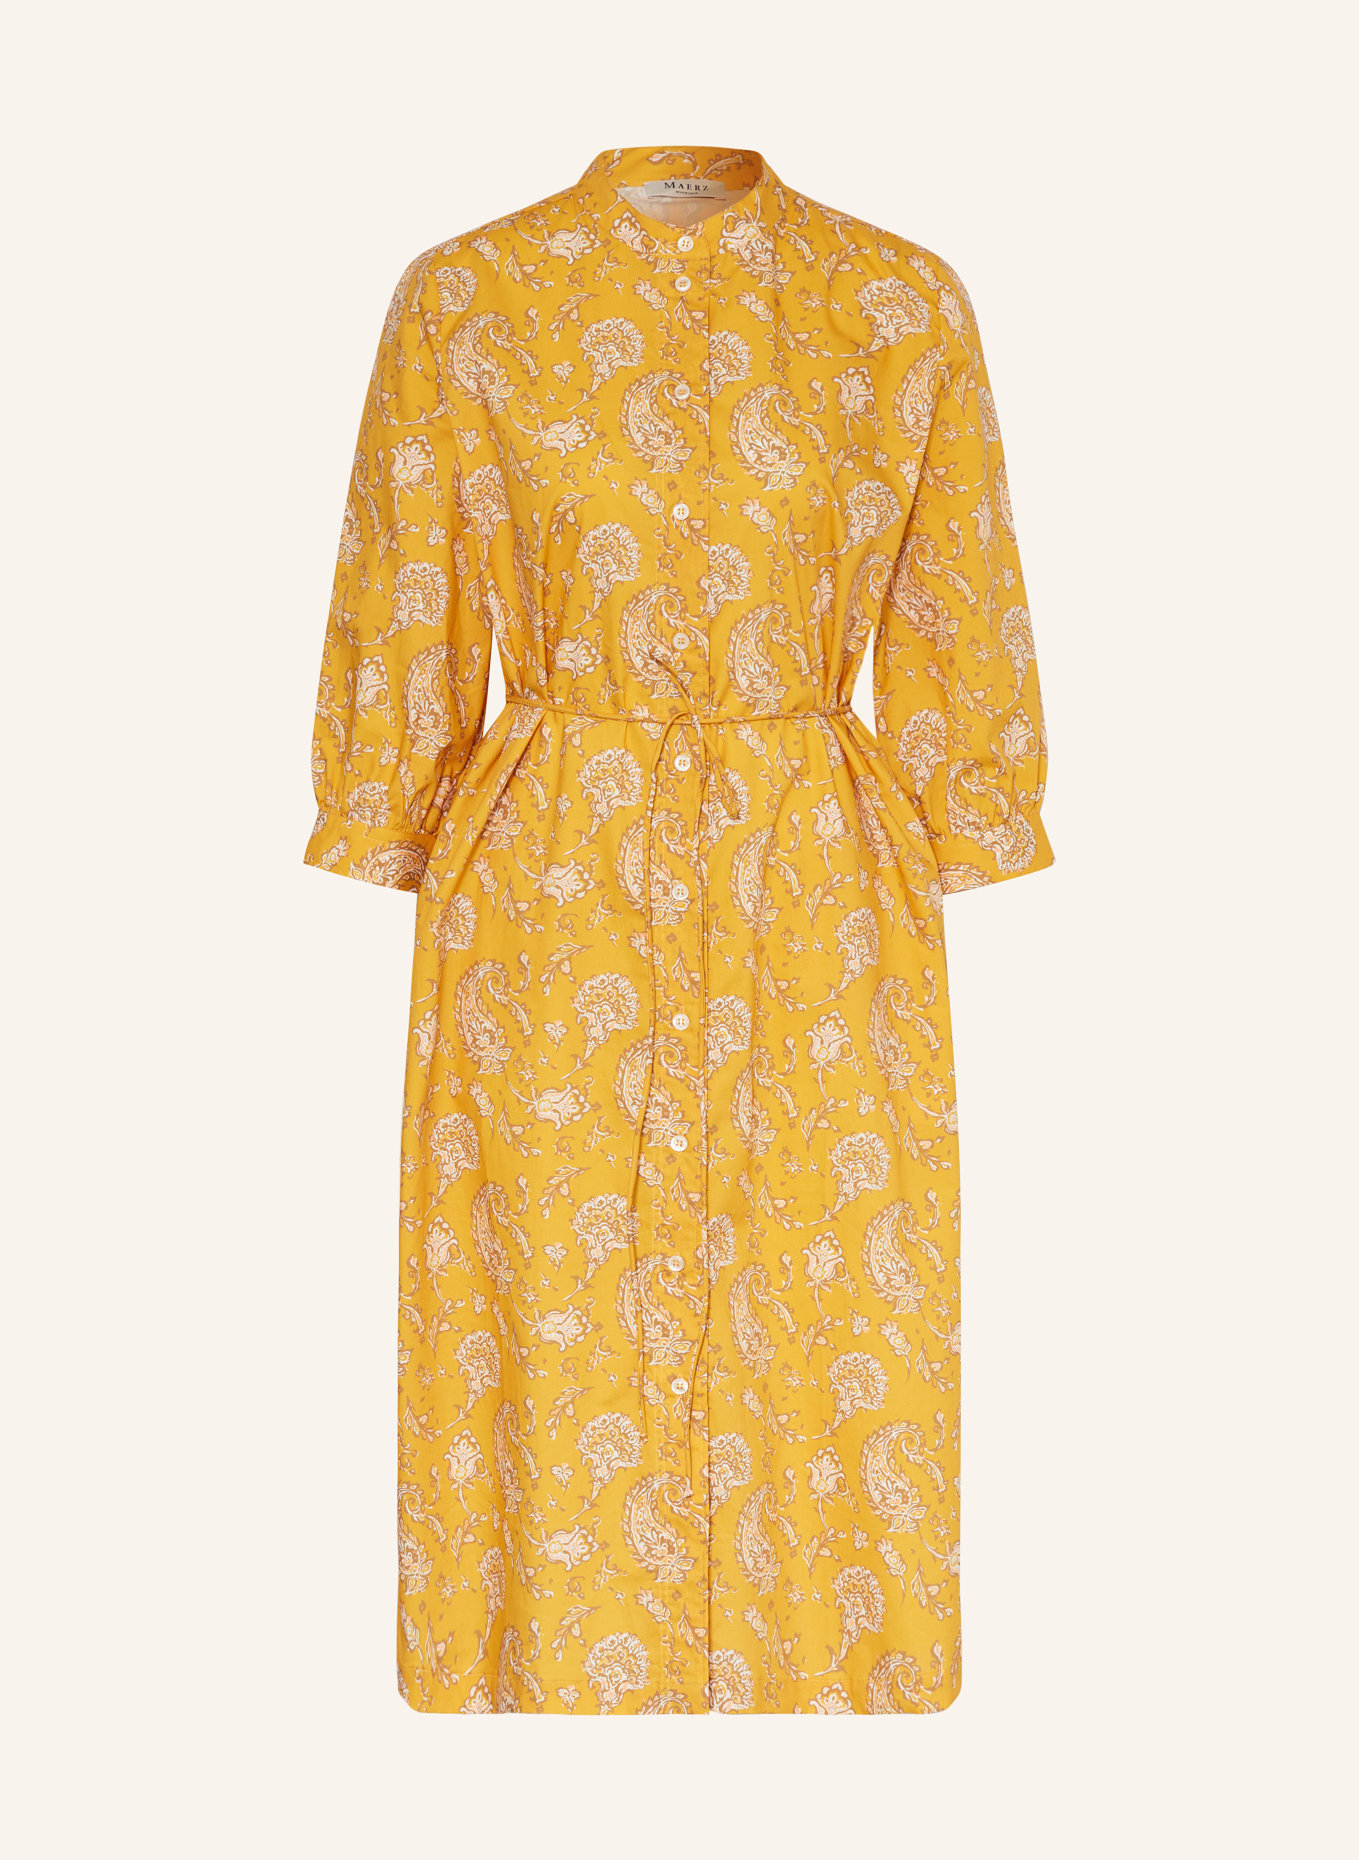 MAERZ MUENCHEN Shirt dress with 3/4 sleeves, Color: YELLOW/ WHITE/ BROWN (Image 1)